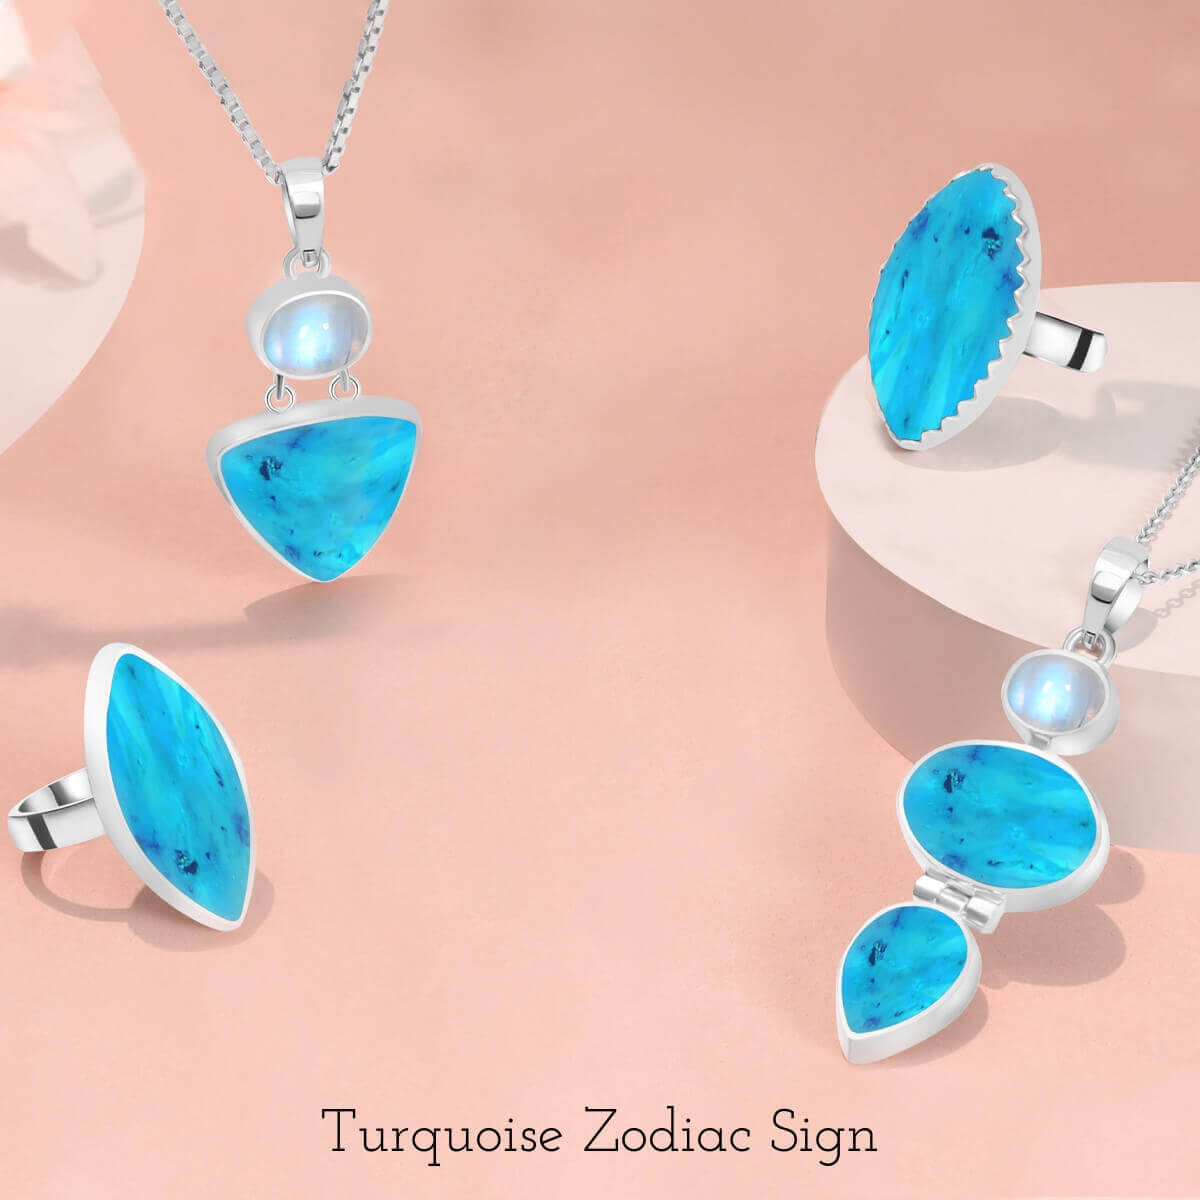 Zodiac sign associated with Turquoise